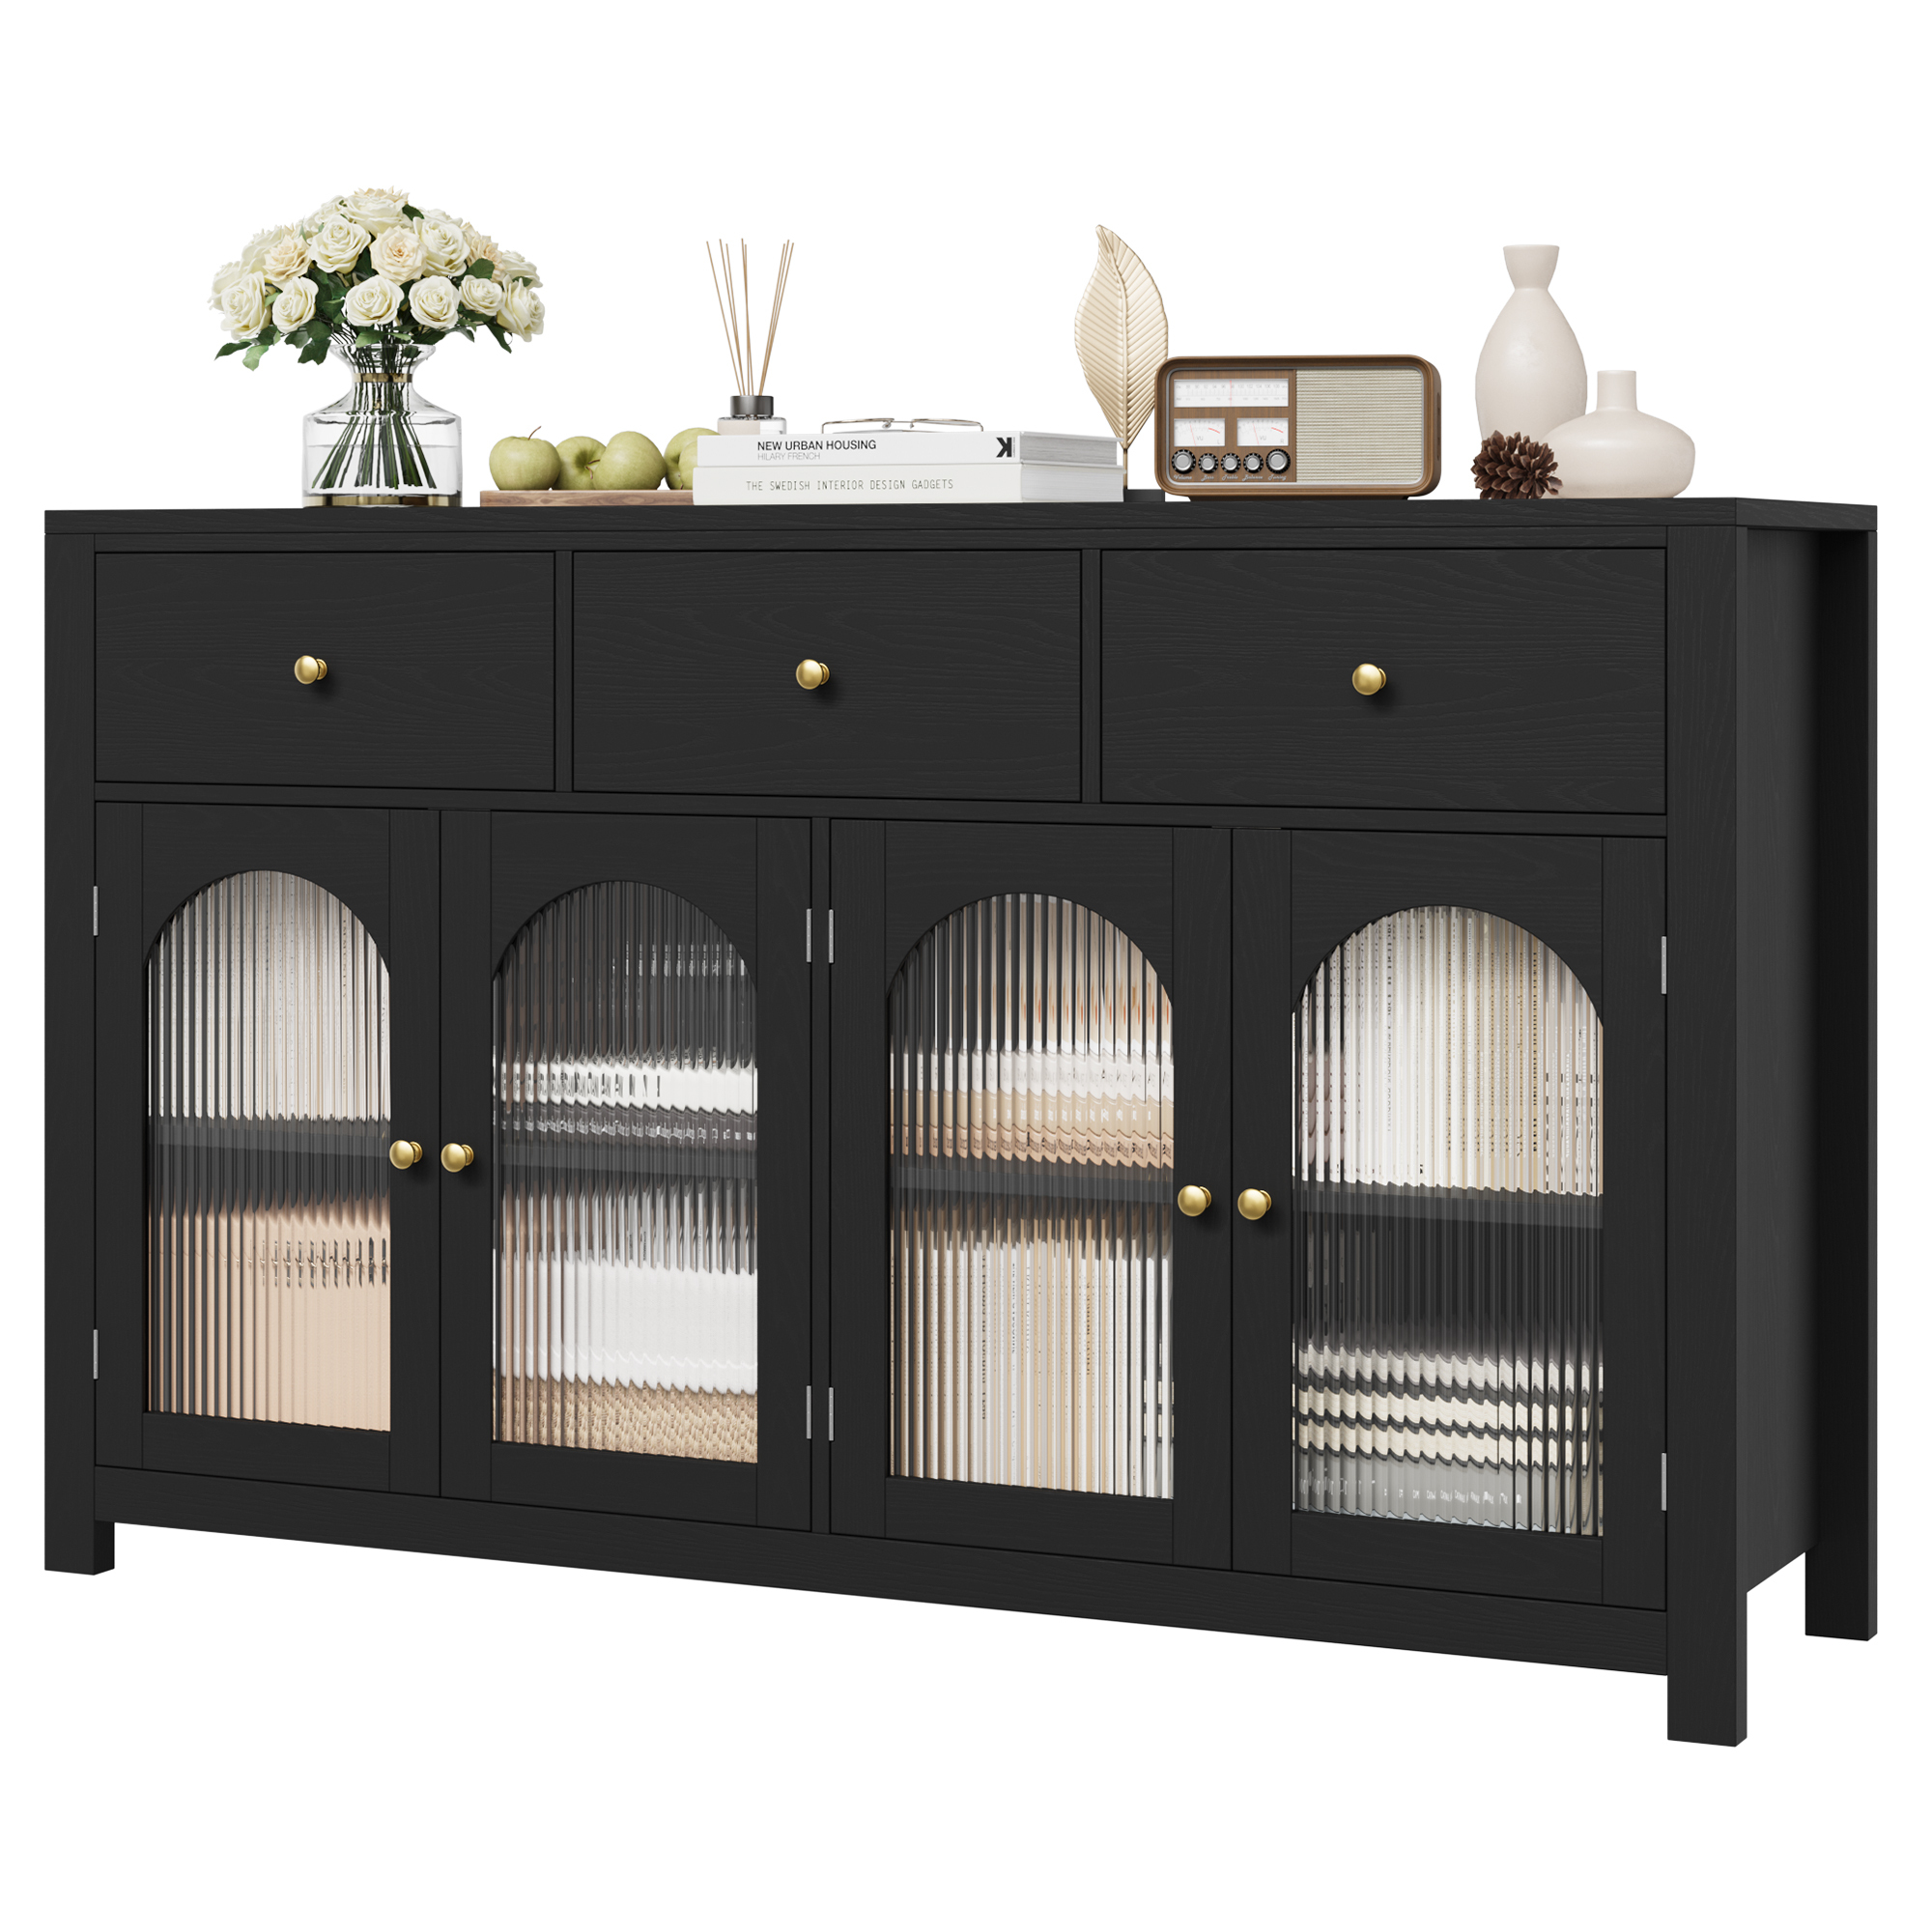 Homfa 55'' Large Sideboard Buffet Cabinet, Kitchen Storage Cabinet with 3 Drawers and 4 Glass Doors, Wood Coffee Bar Cabinet for Living Room， Black - image 1 of 7